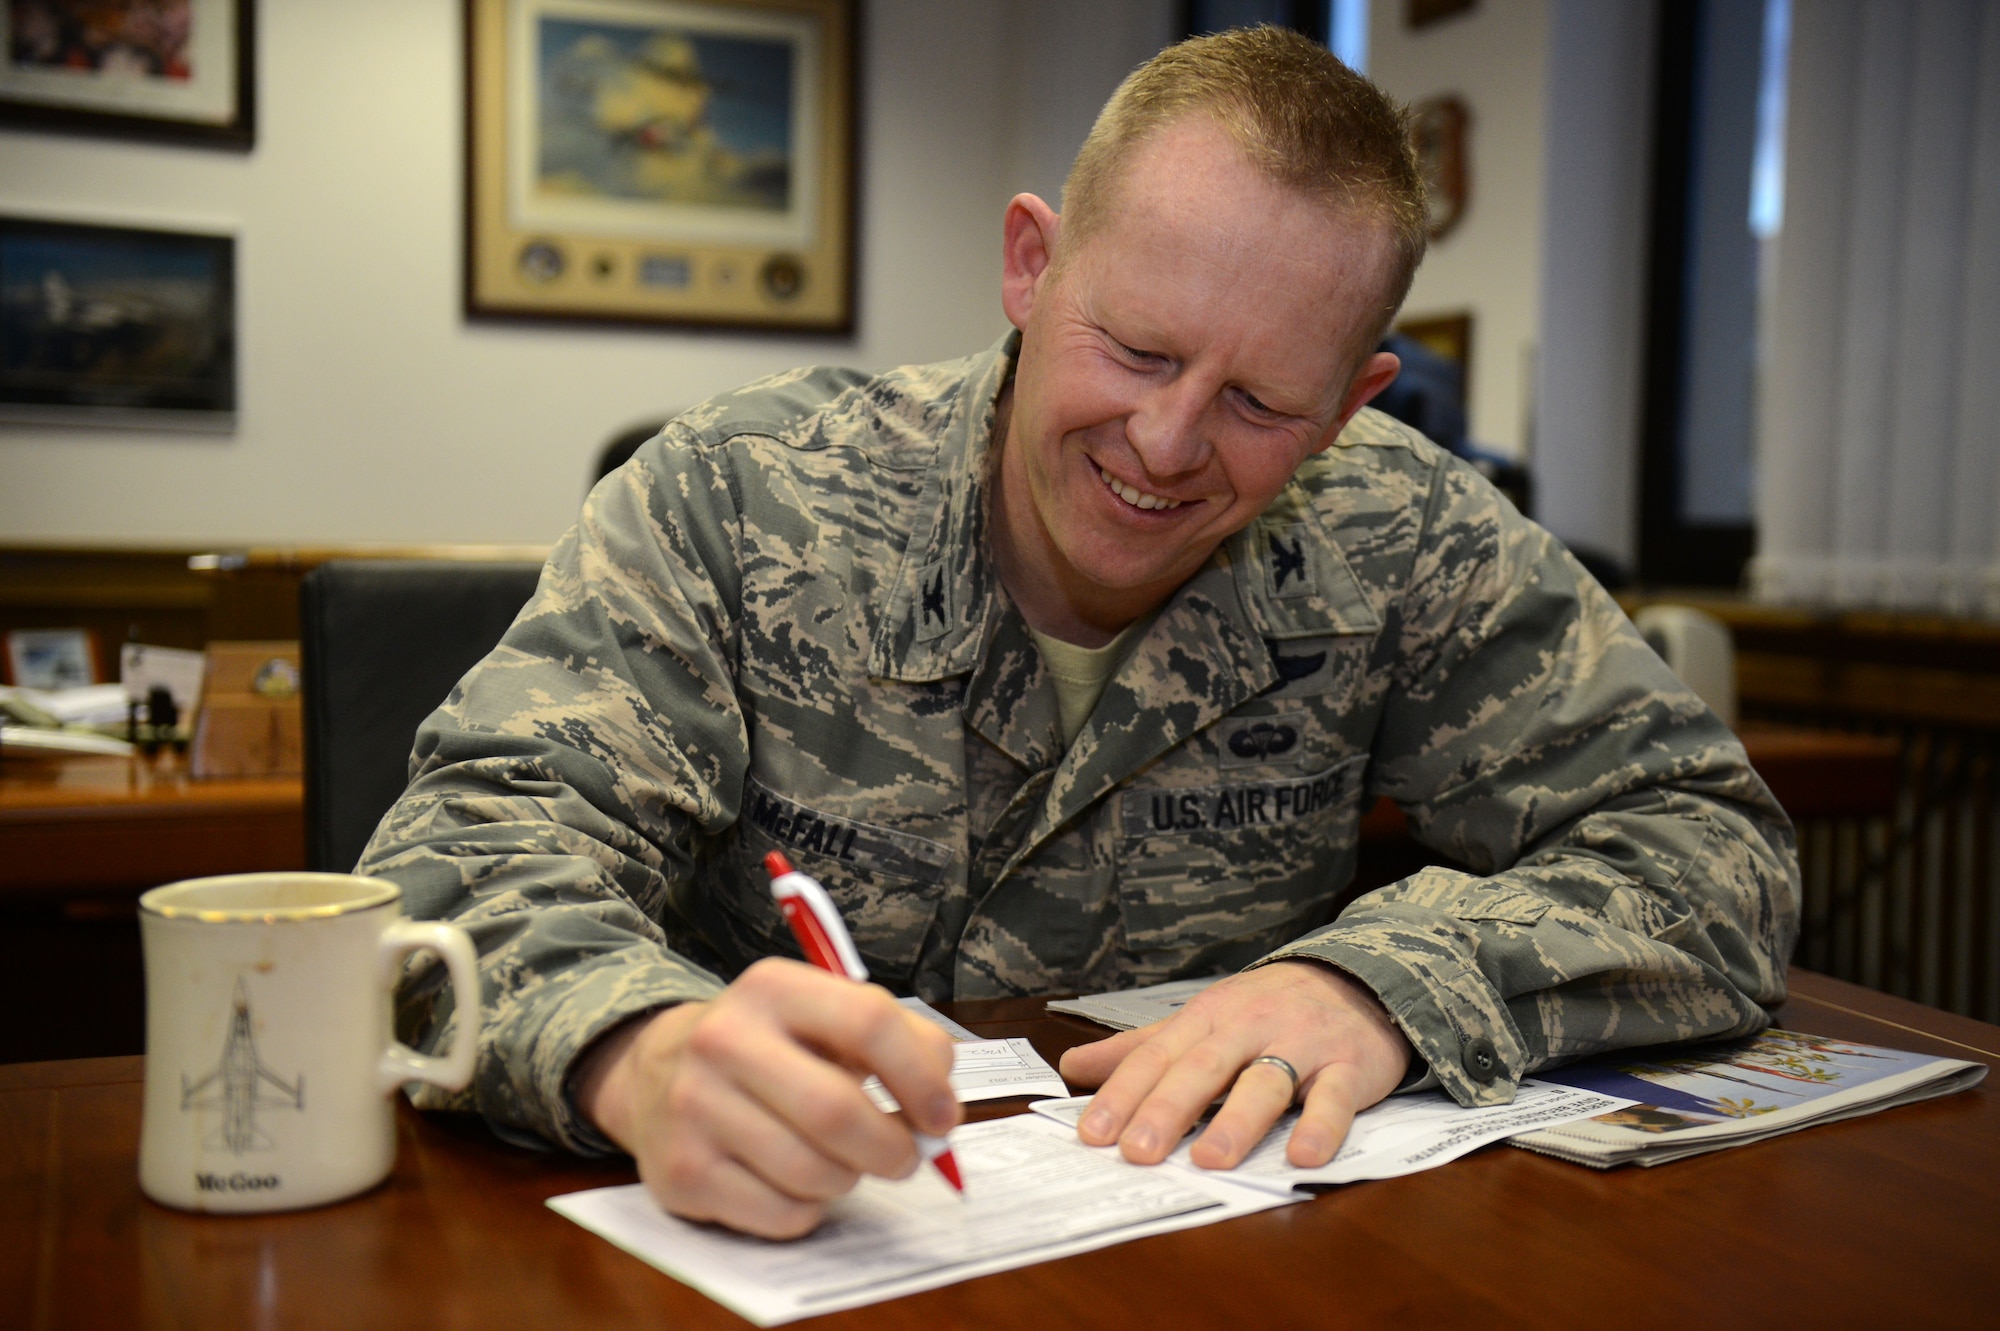 SPANGDAHLEM AIR BASE, Germany – U.S. Air Force Col. Joseph McFall, 52nd Fighter Wing vice commander from Maple Valley, Wash., signs a Combined Federal Campaign Overseas pledge card at the 52nd FW headquarters building Oct. 17, 2012.  The Spangdahlem CFC ends Nov. 16.  People can still donate through unit coordinators or online at http://www.cfcoverseas.org.  CFC has more than 200 campaigns throughout the world to help to raise millions of dollars for eligible non-profit organizations each year. (U.S. Air Force photo by Airman 1st Class Gustavo Castillo/Released)